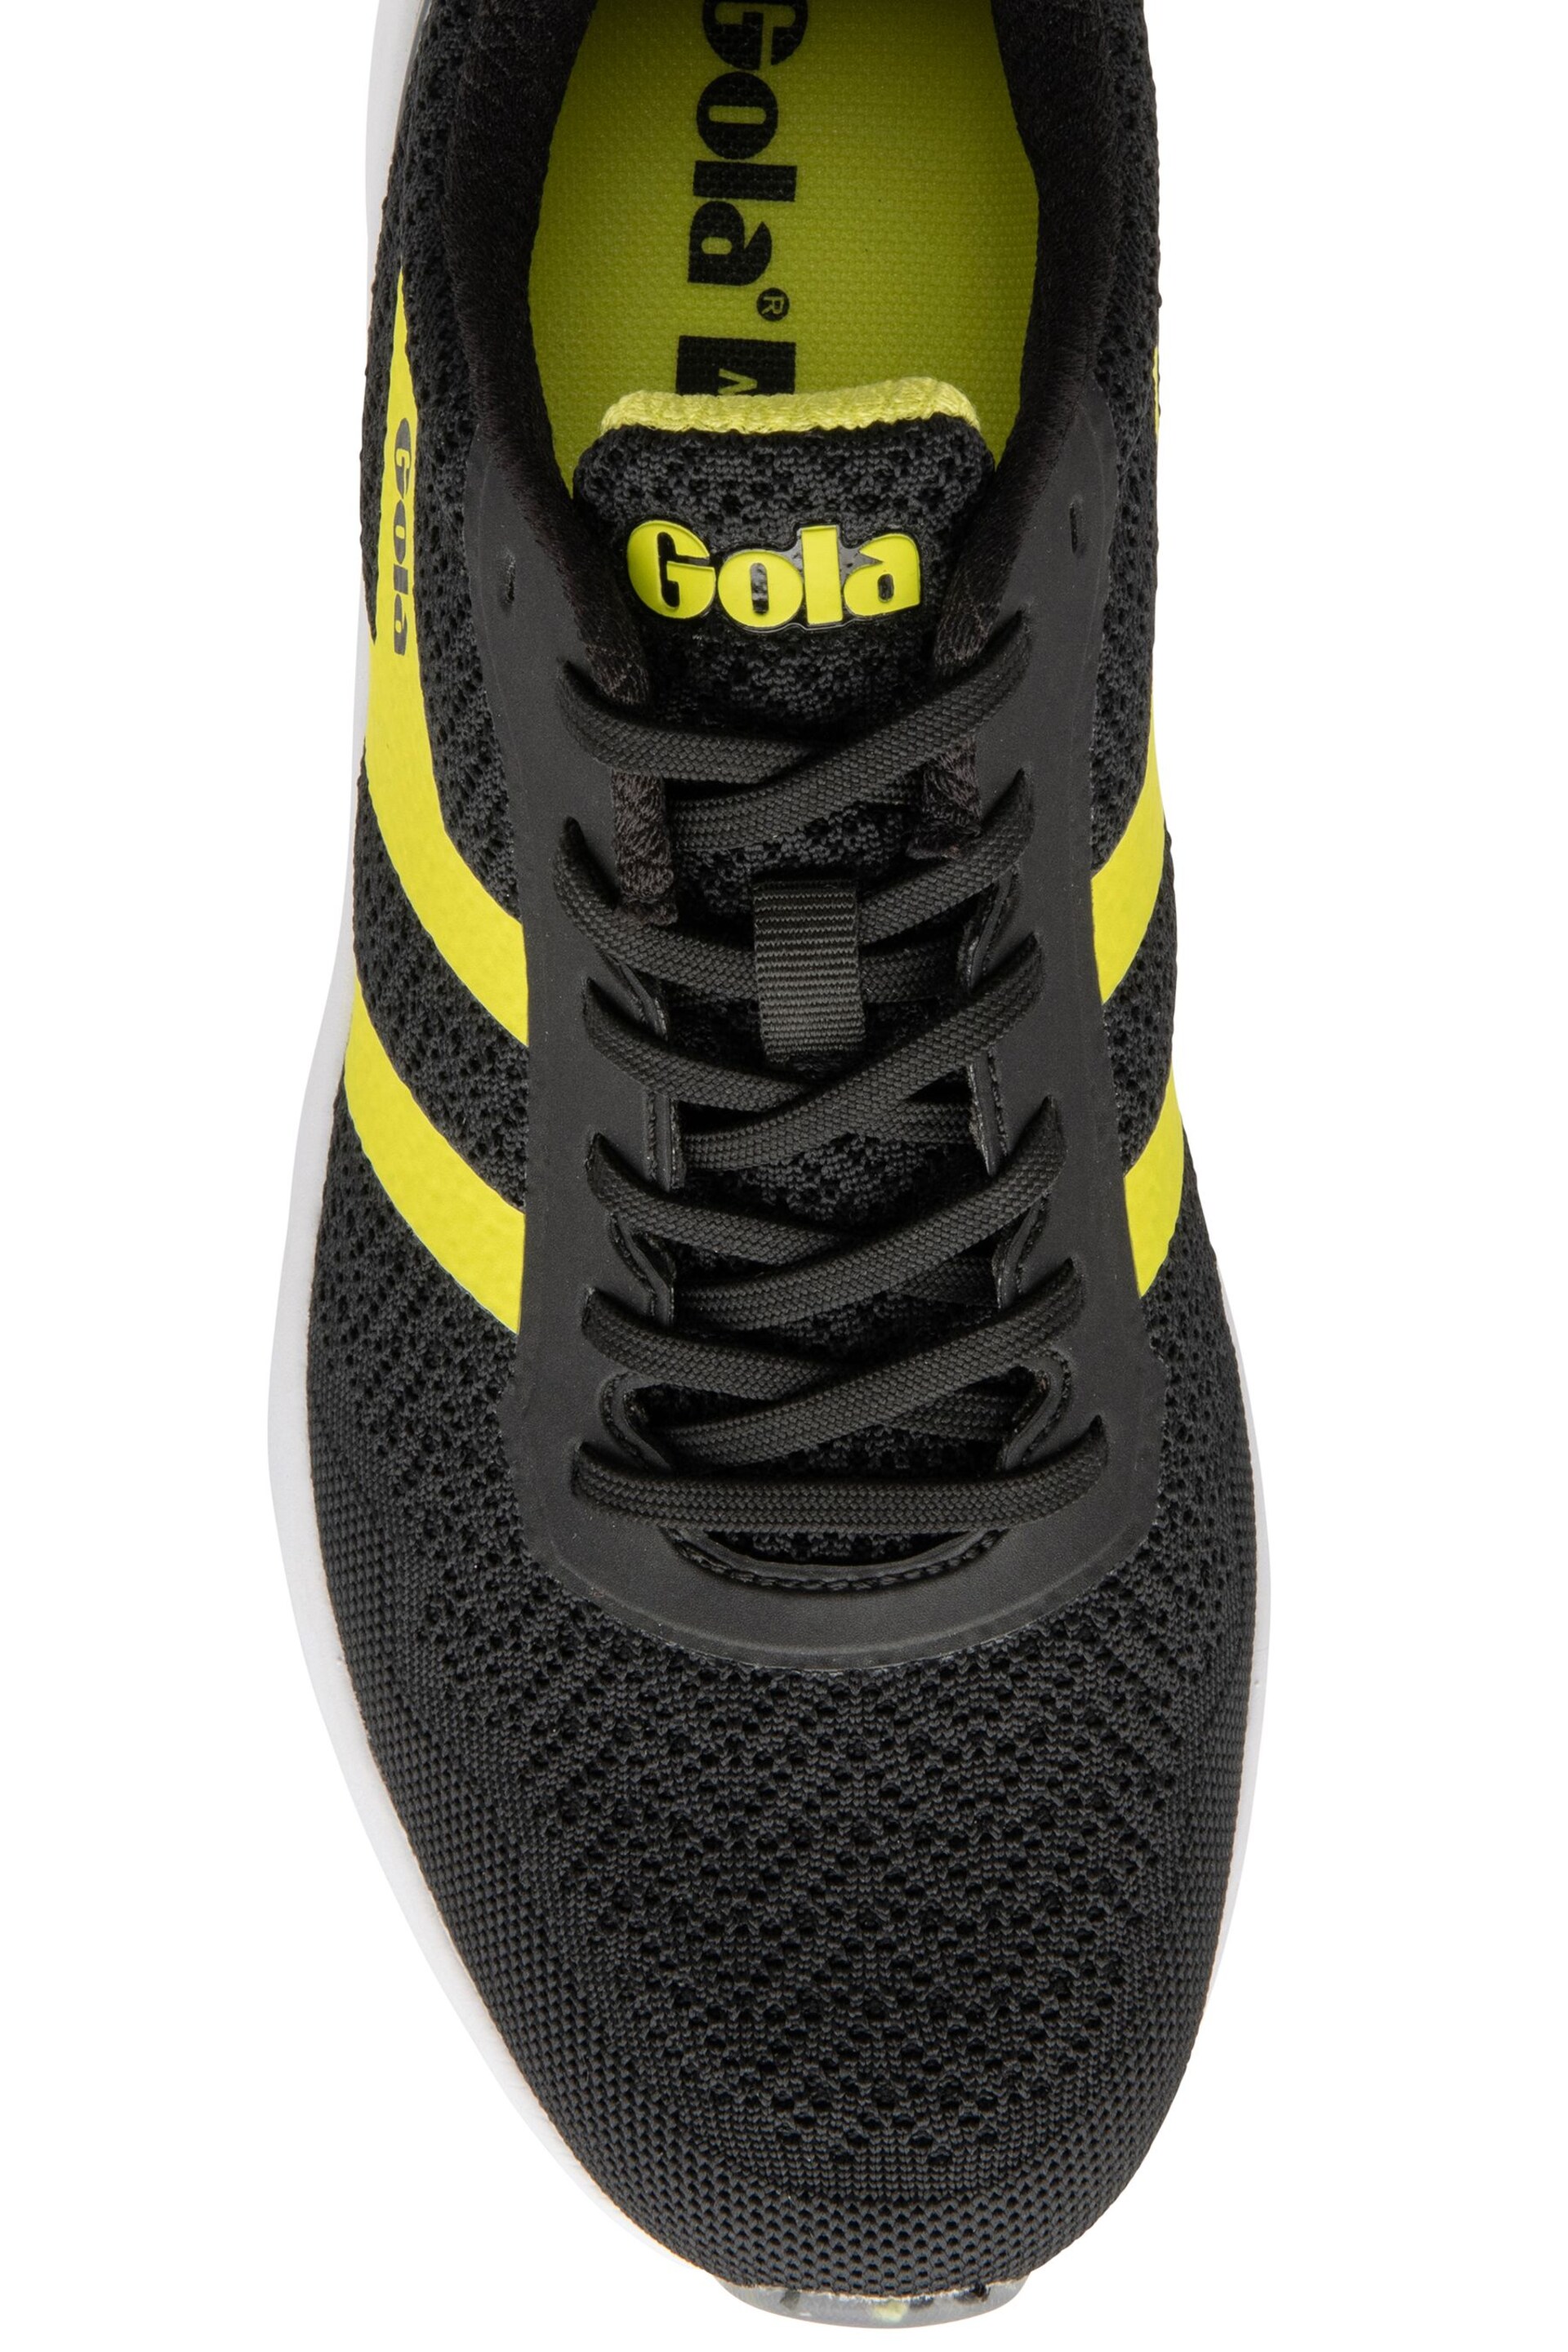 Gola Black Men's Typhoon RMD Mesh Lace-Up Running Trainers - Image 4 of 4